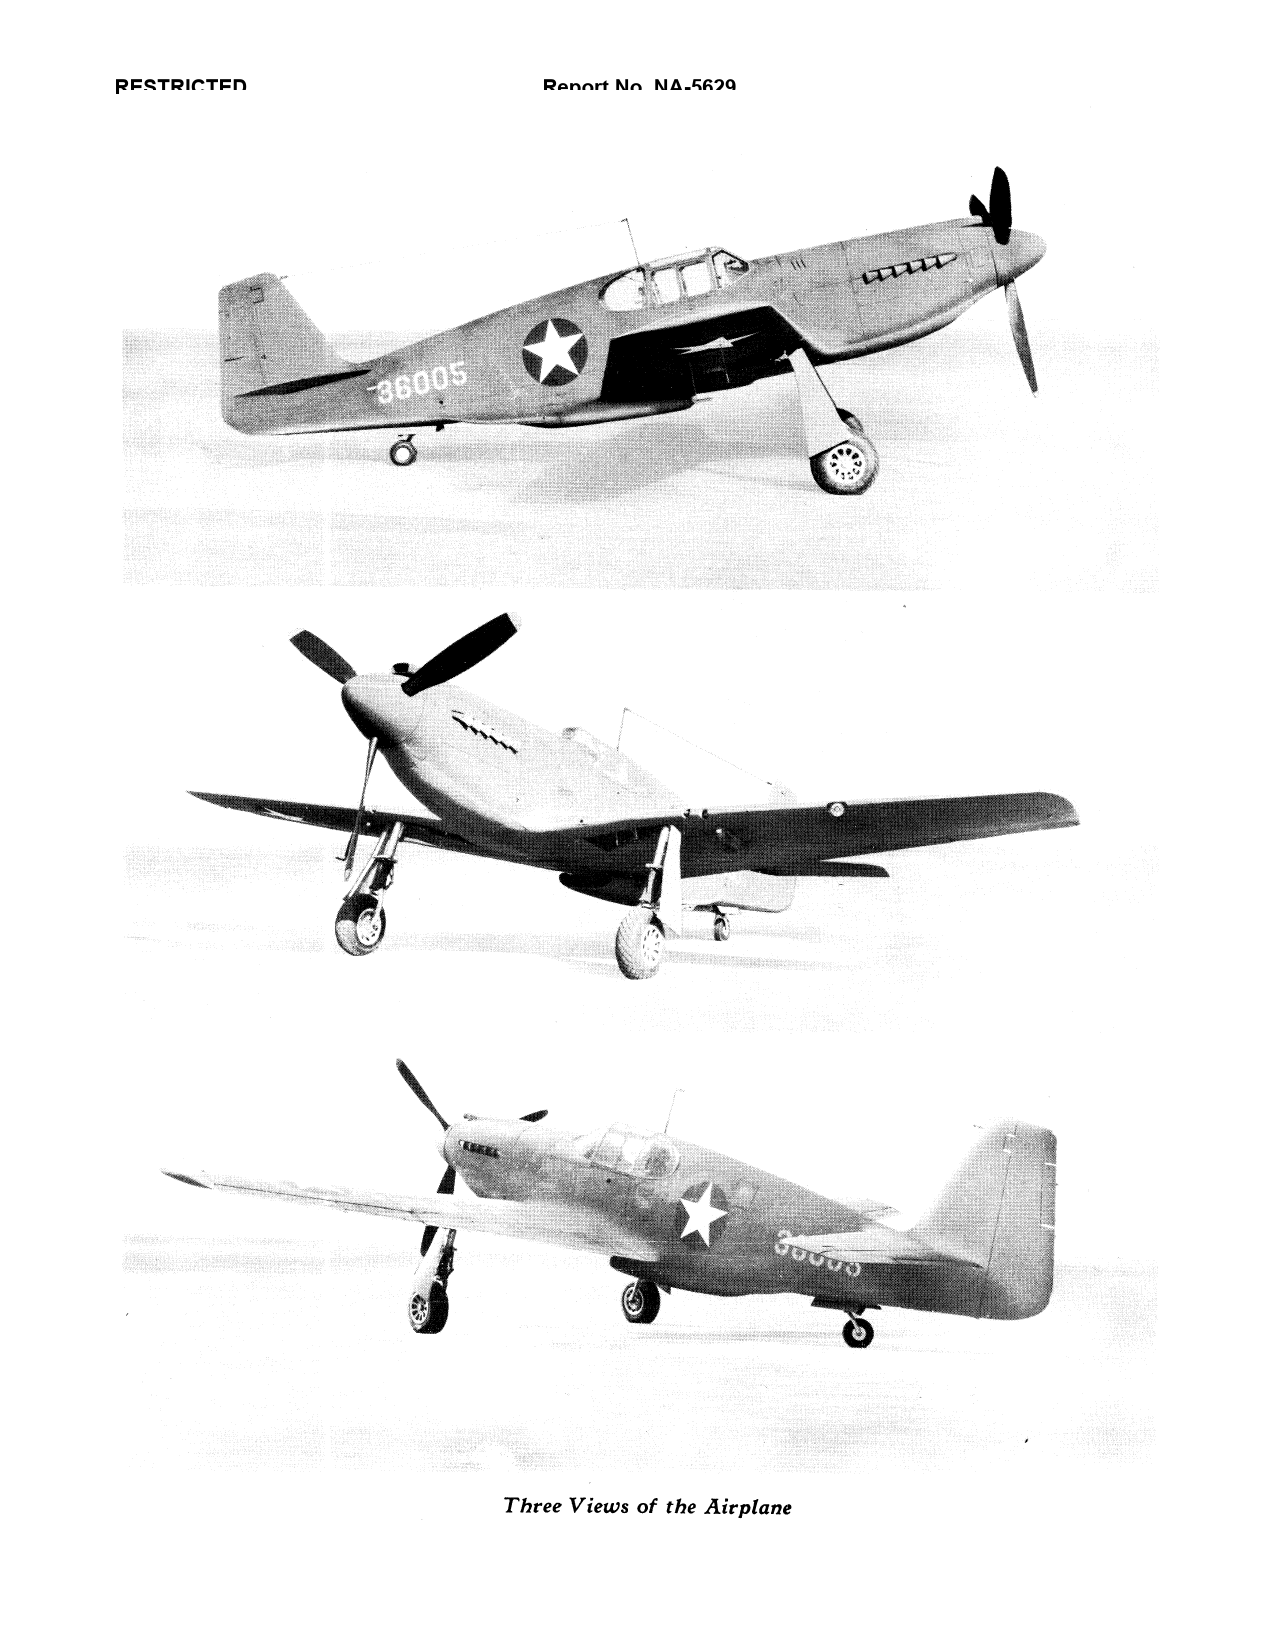 Sample page 14 from AirCorps Library document: Manual of Instructions for the Maintenance of the P-51A